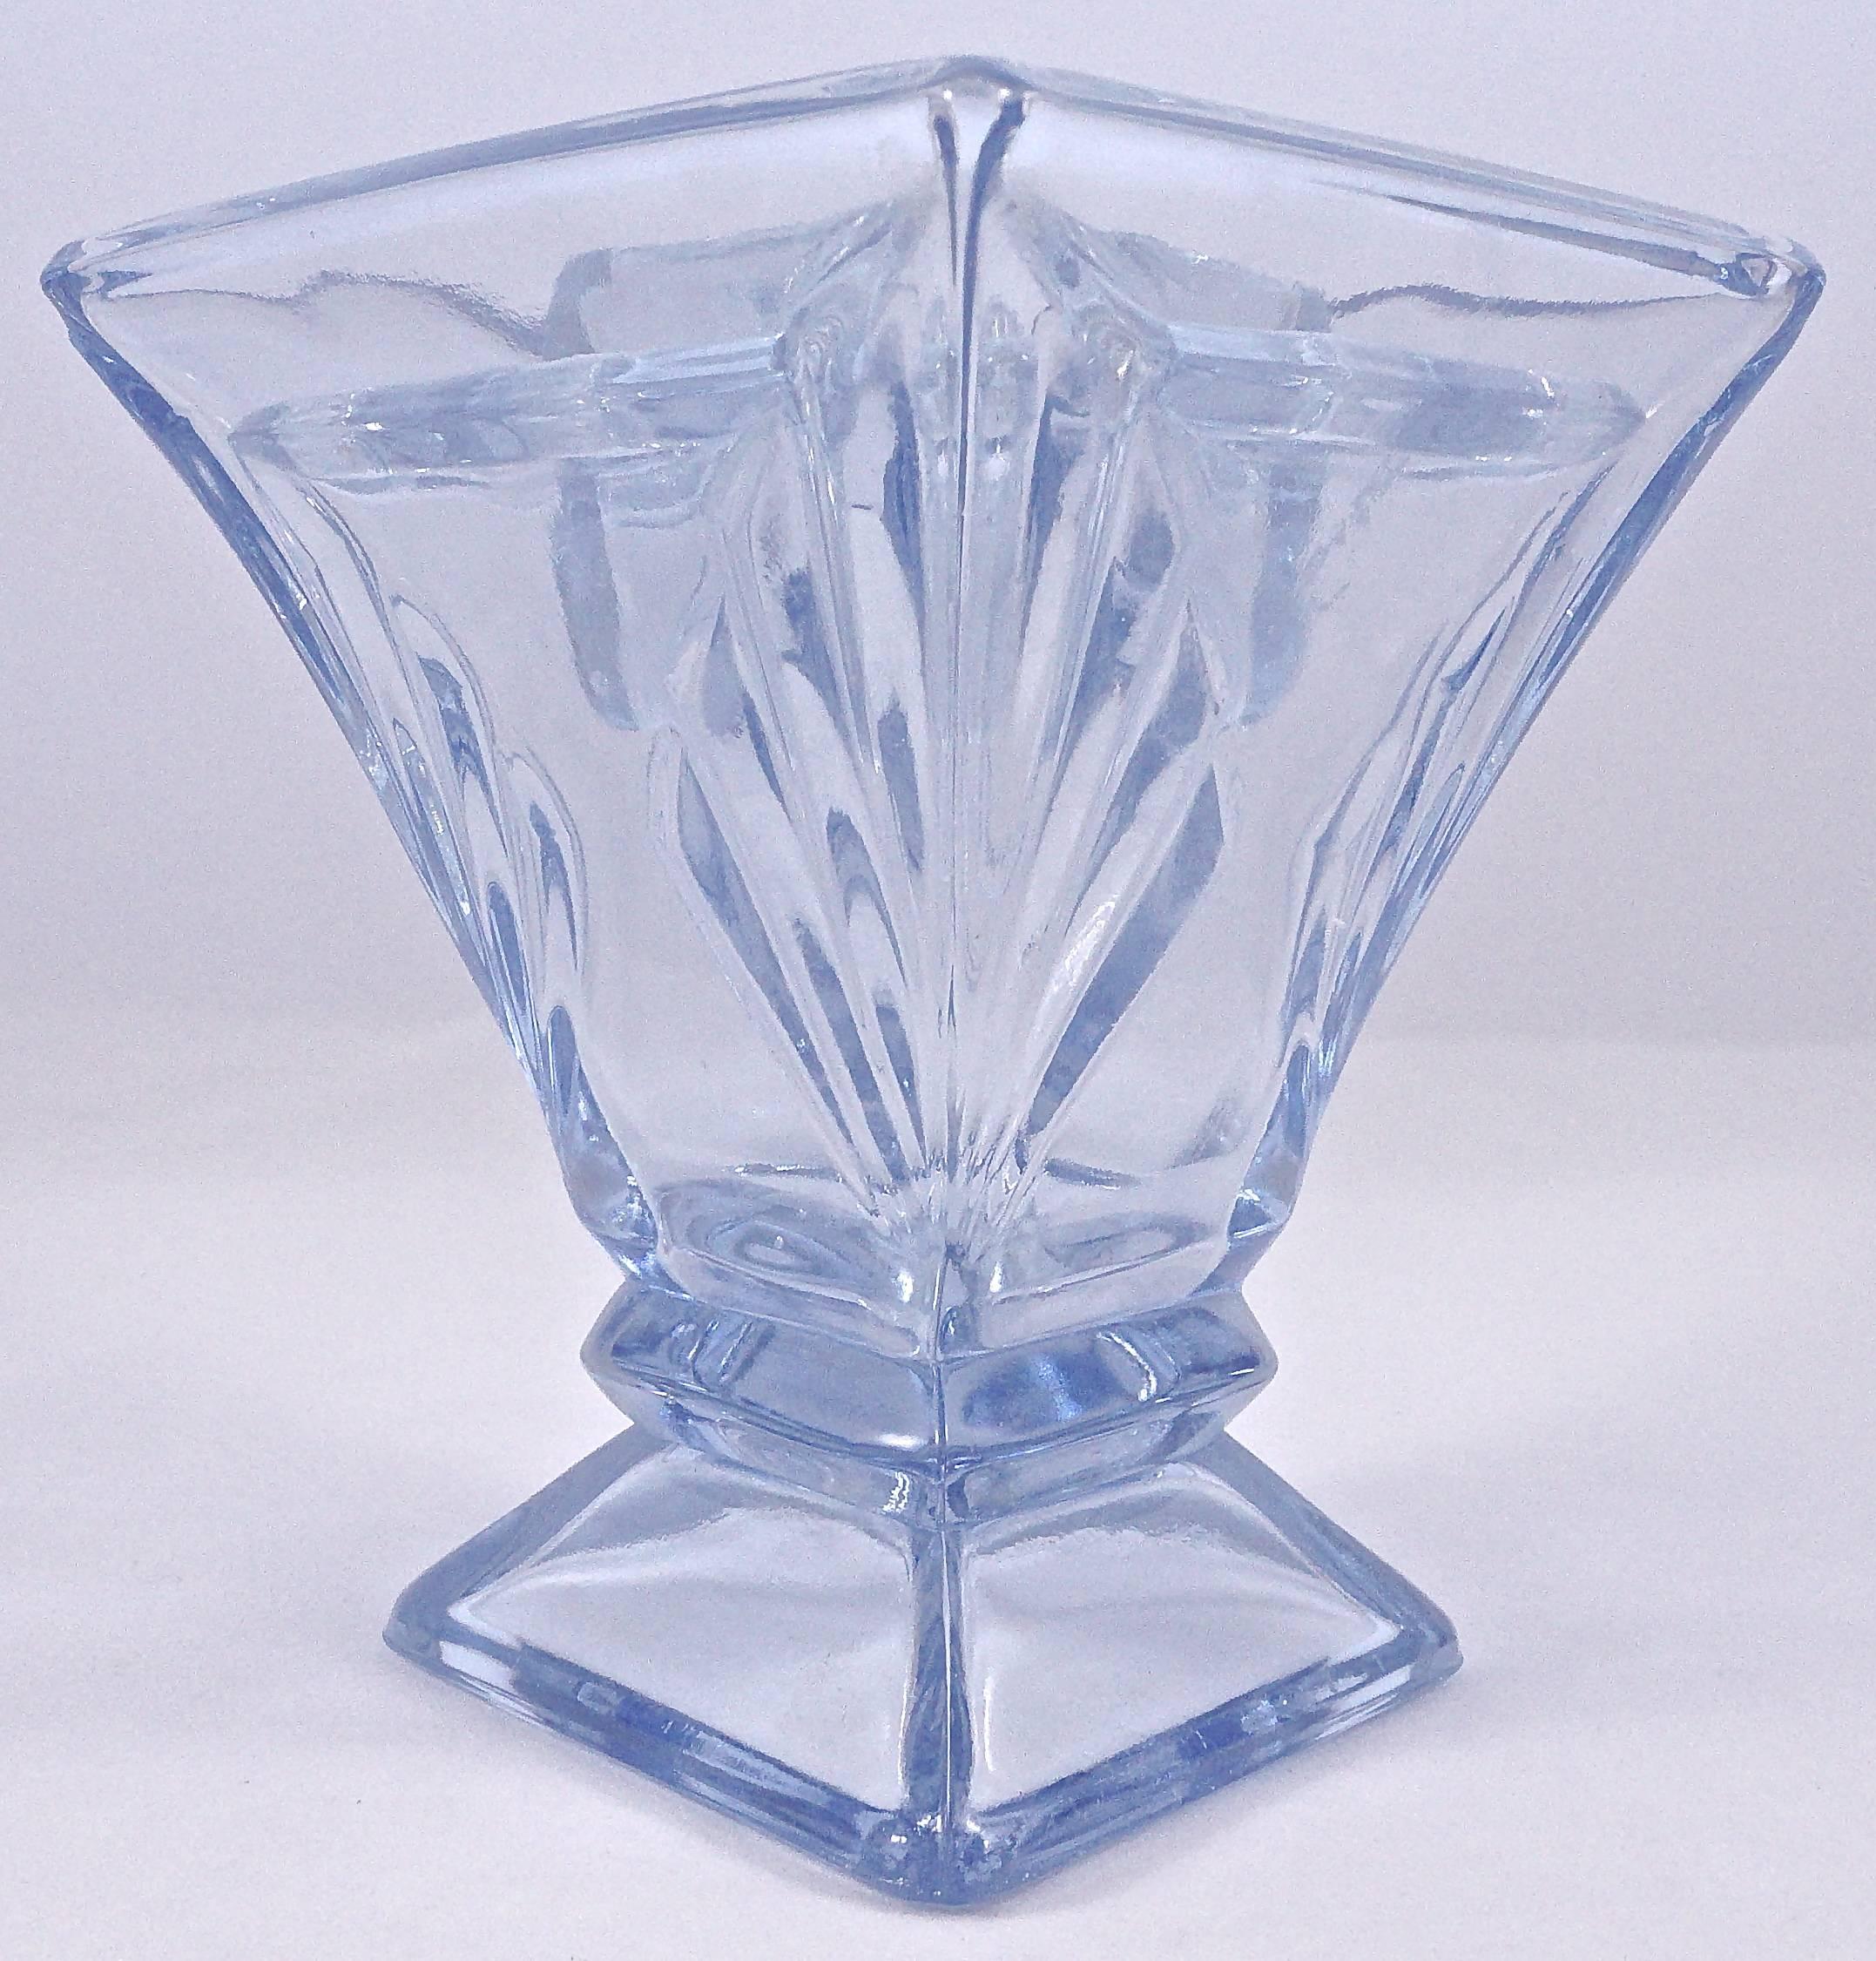 Bagley blue Art Deco diamond shaped vase made from pressed glass with removable flower frog/holder. This design by Bagley & Co was called Spinette. Measuring height 11.4cm (4.5 inches) by width 18.8cm (7.4 inches) and 14cm (5.5 inches). There is